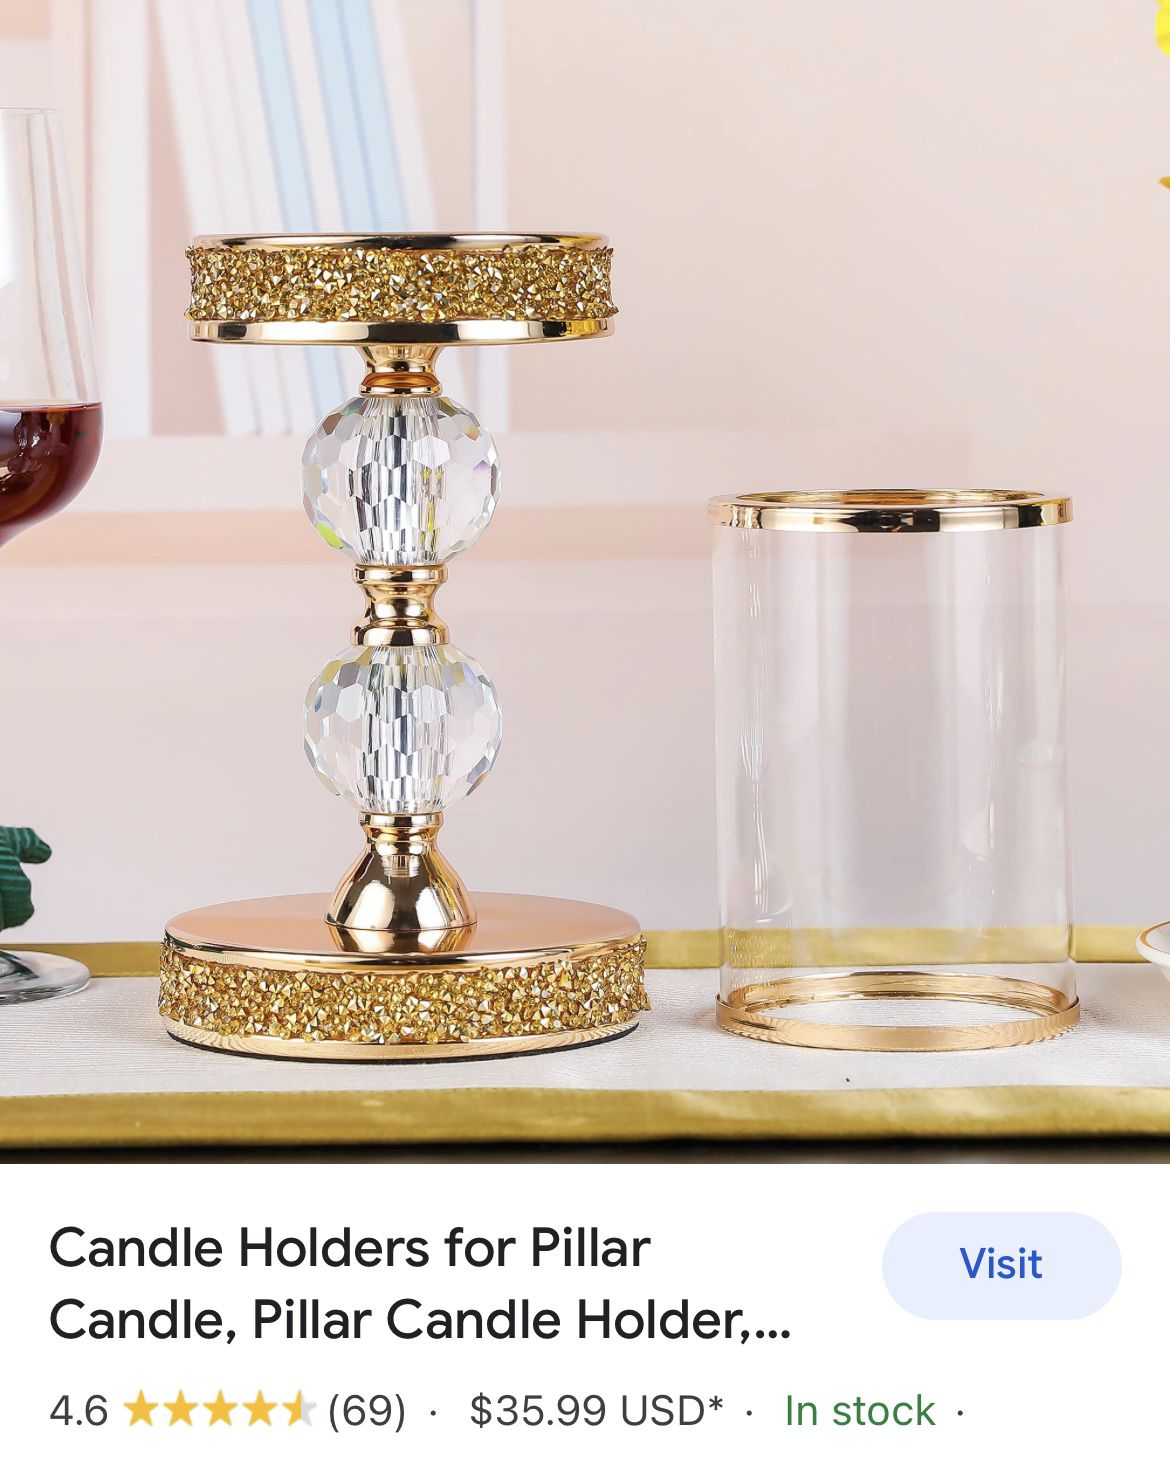 Candle Holders for Pillar Candle, Pillar Candle Holder. 